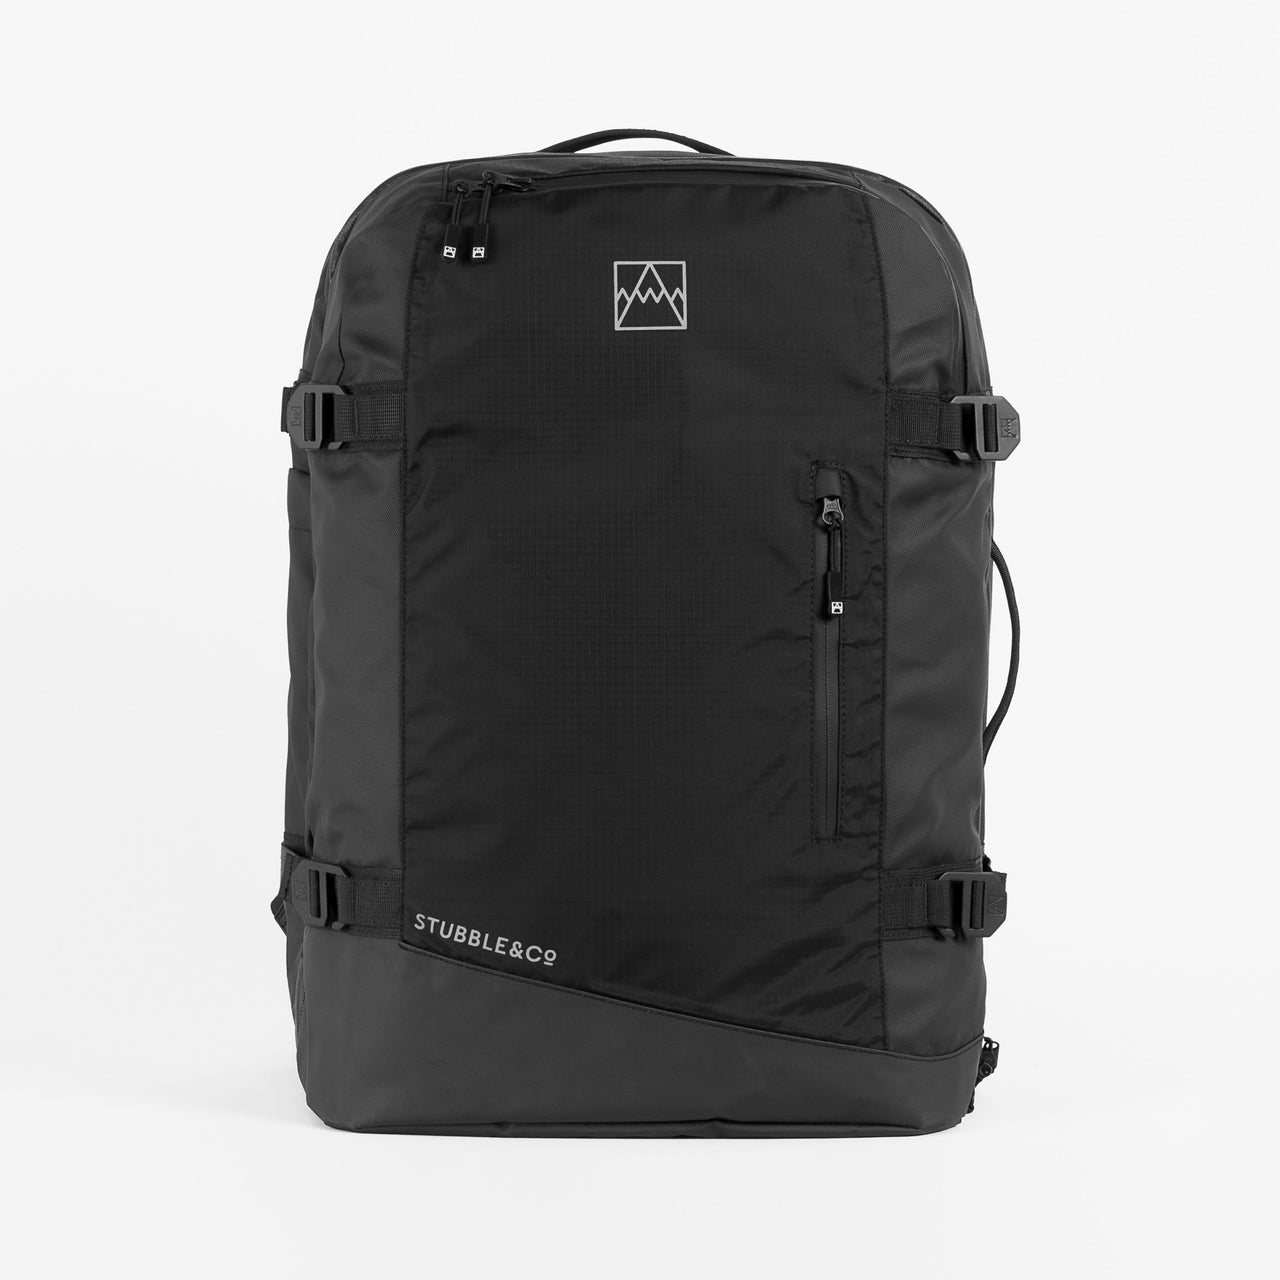 Adventure Bag in All Black front view